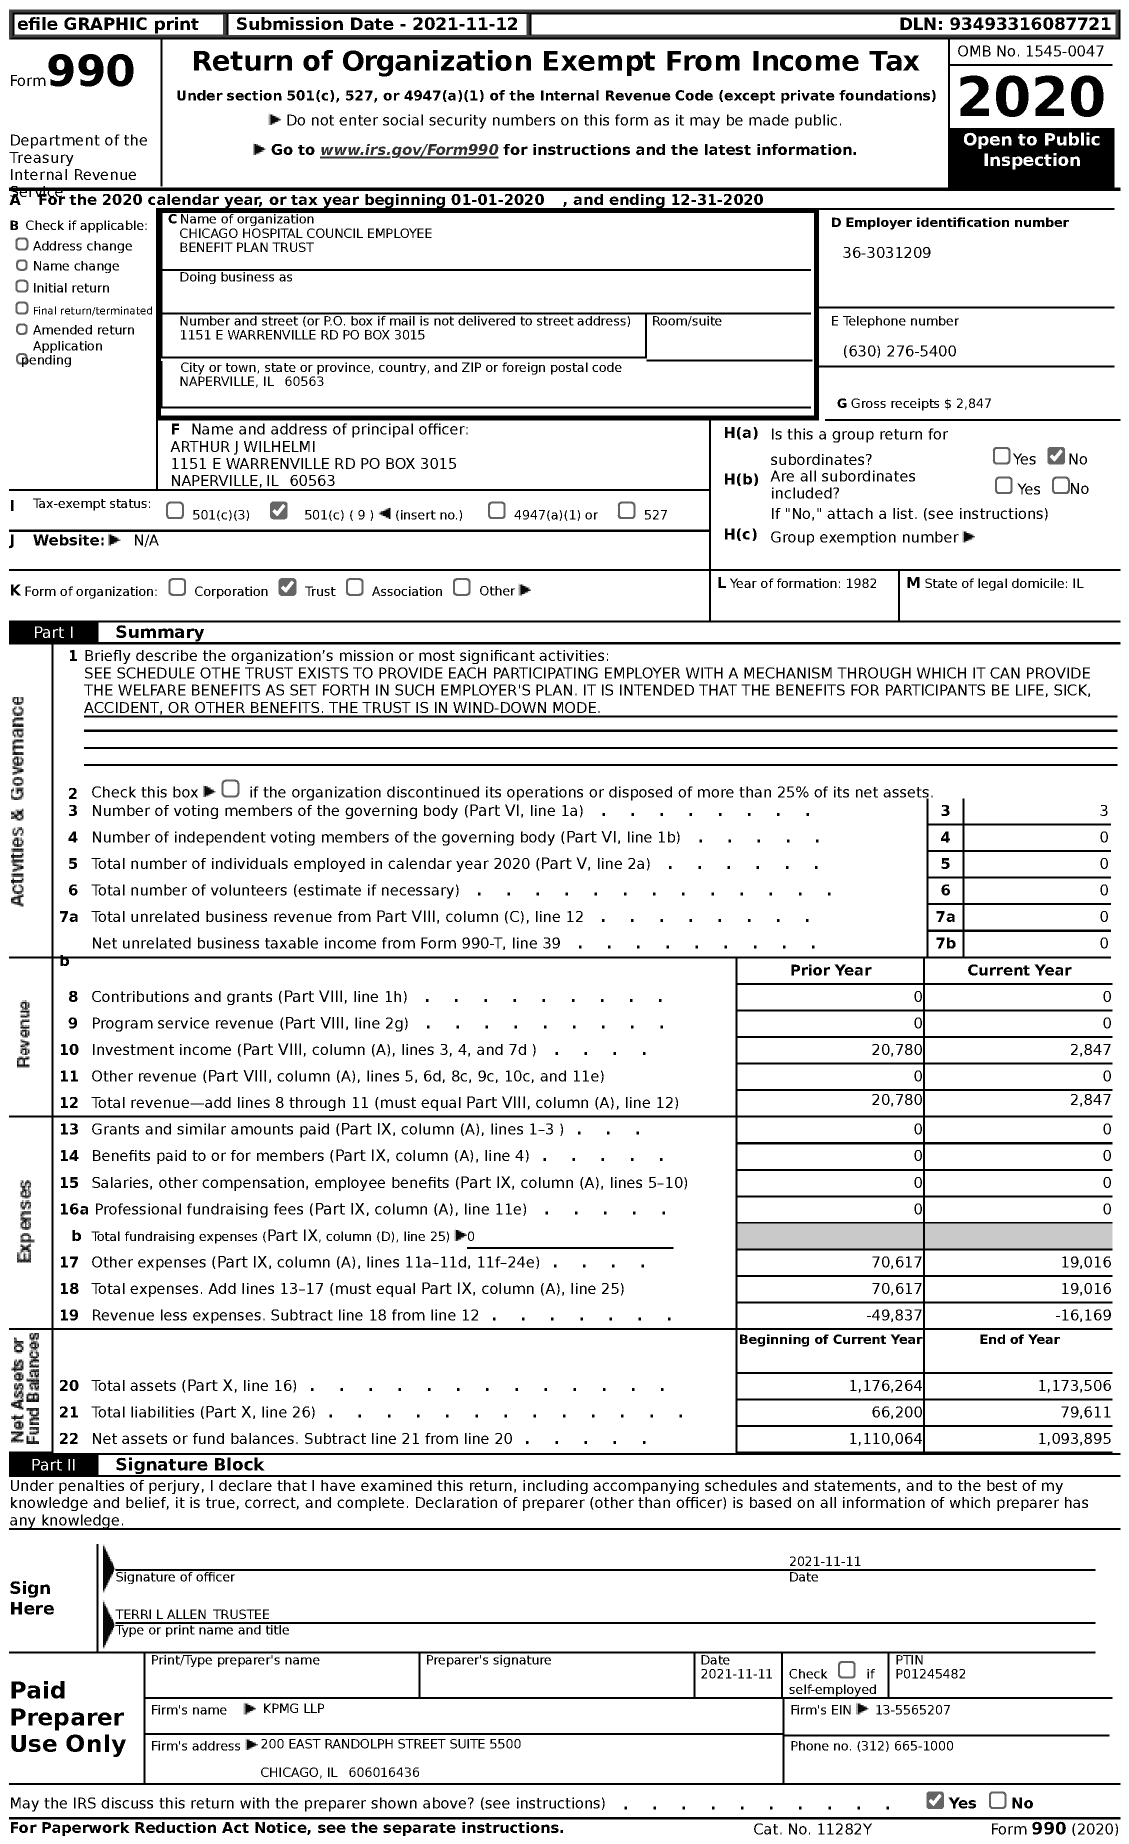 Image of first page of 2020 Form 990 for CHICAGO HOSPITAL Council Employee Benefit Plan Trust